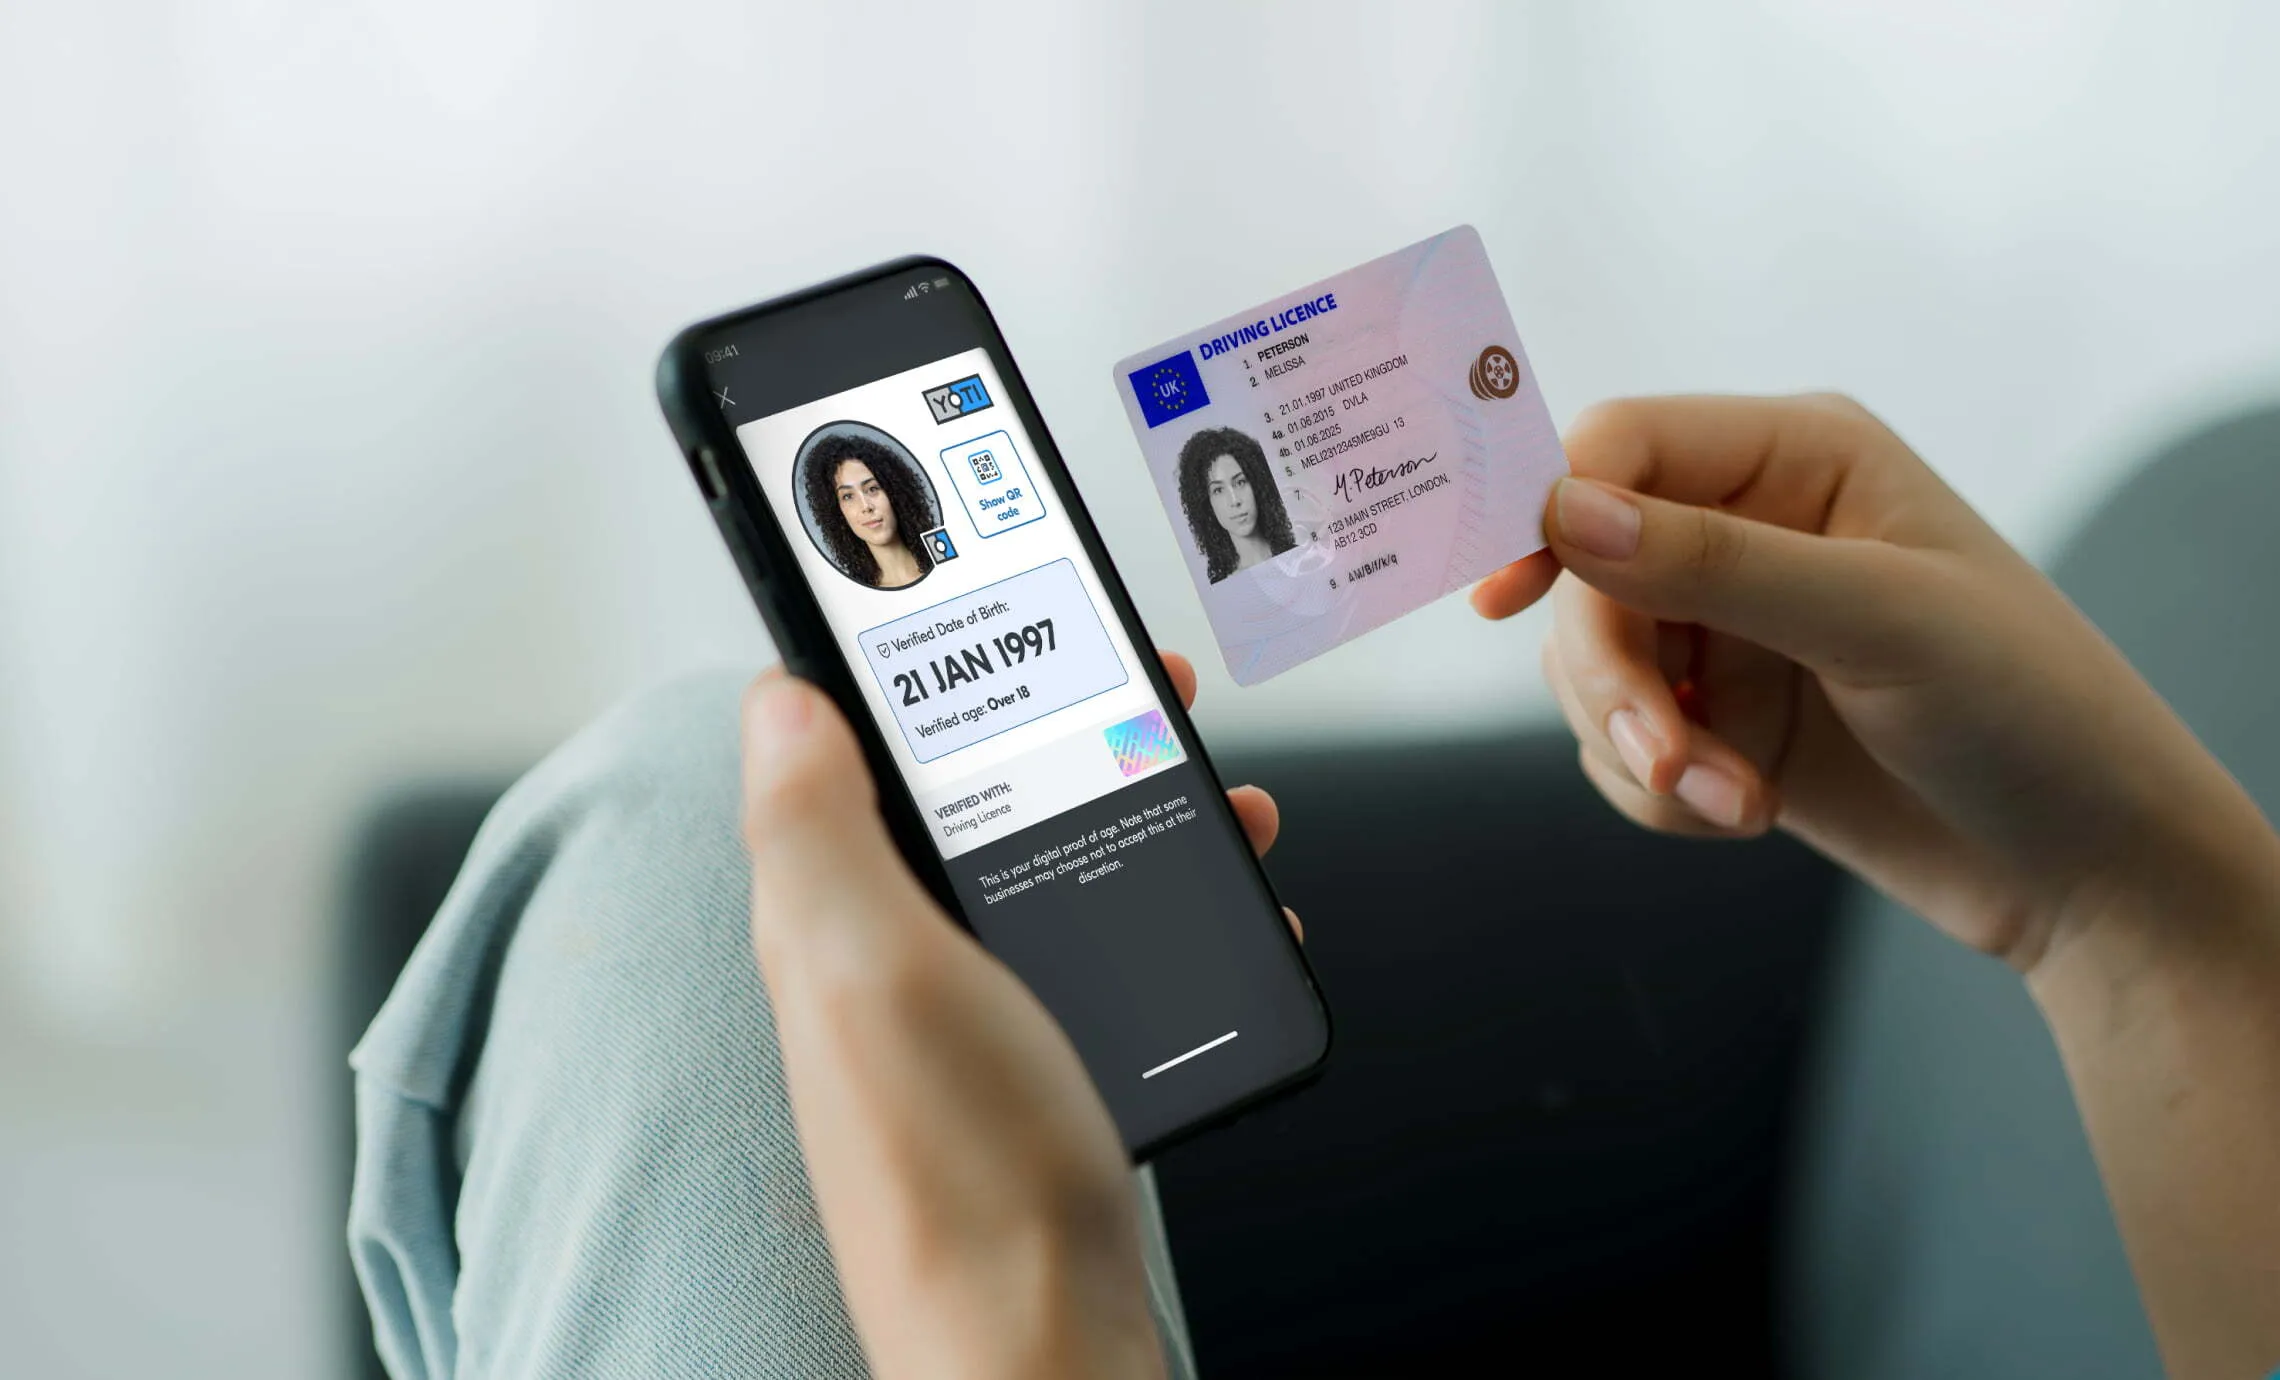 An image of a person holding smart phone in their left hand. On the phone's display is a Yoti Digital ID showing their verified credentials. In the person's right hand is their physical UK driving licence. The person is holding the two forms of ID next to each other.